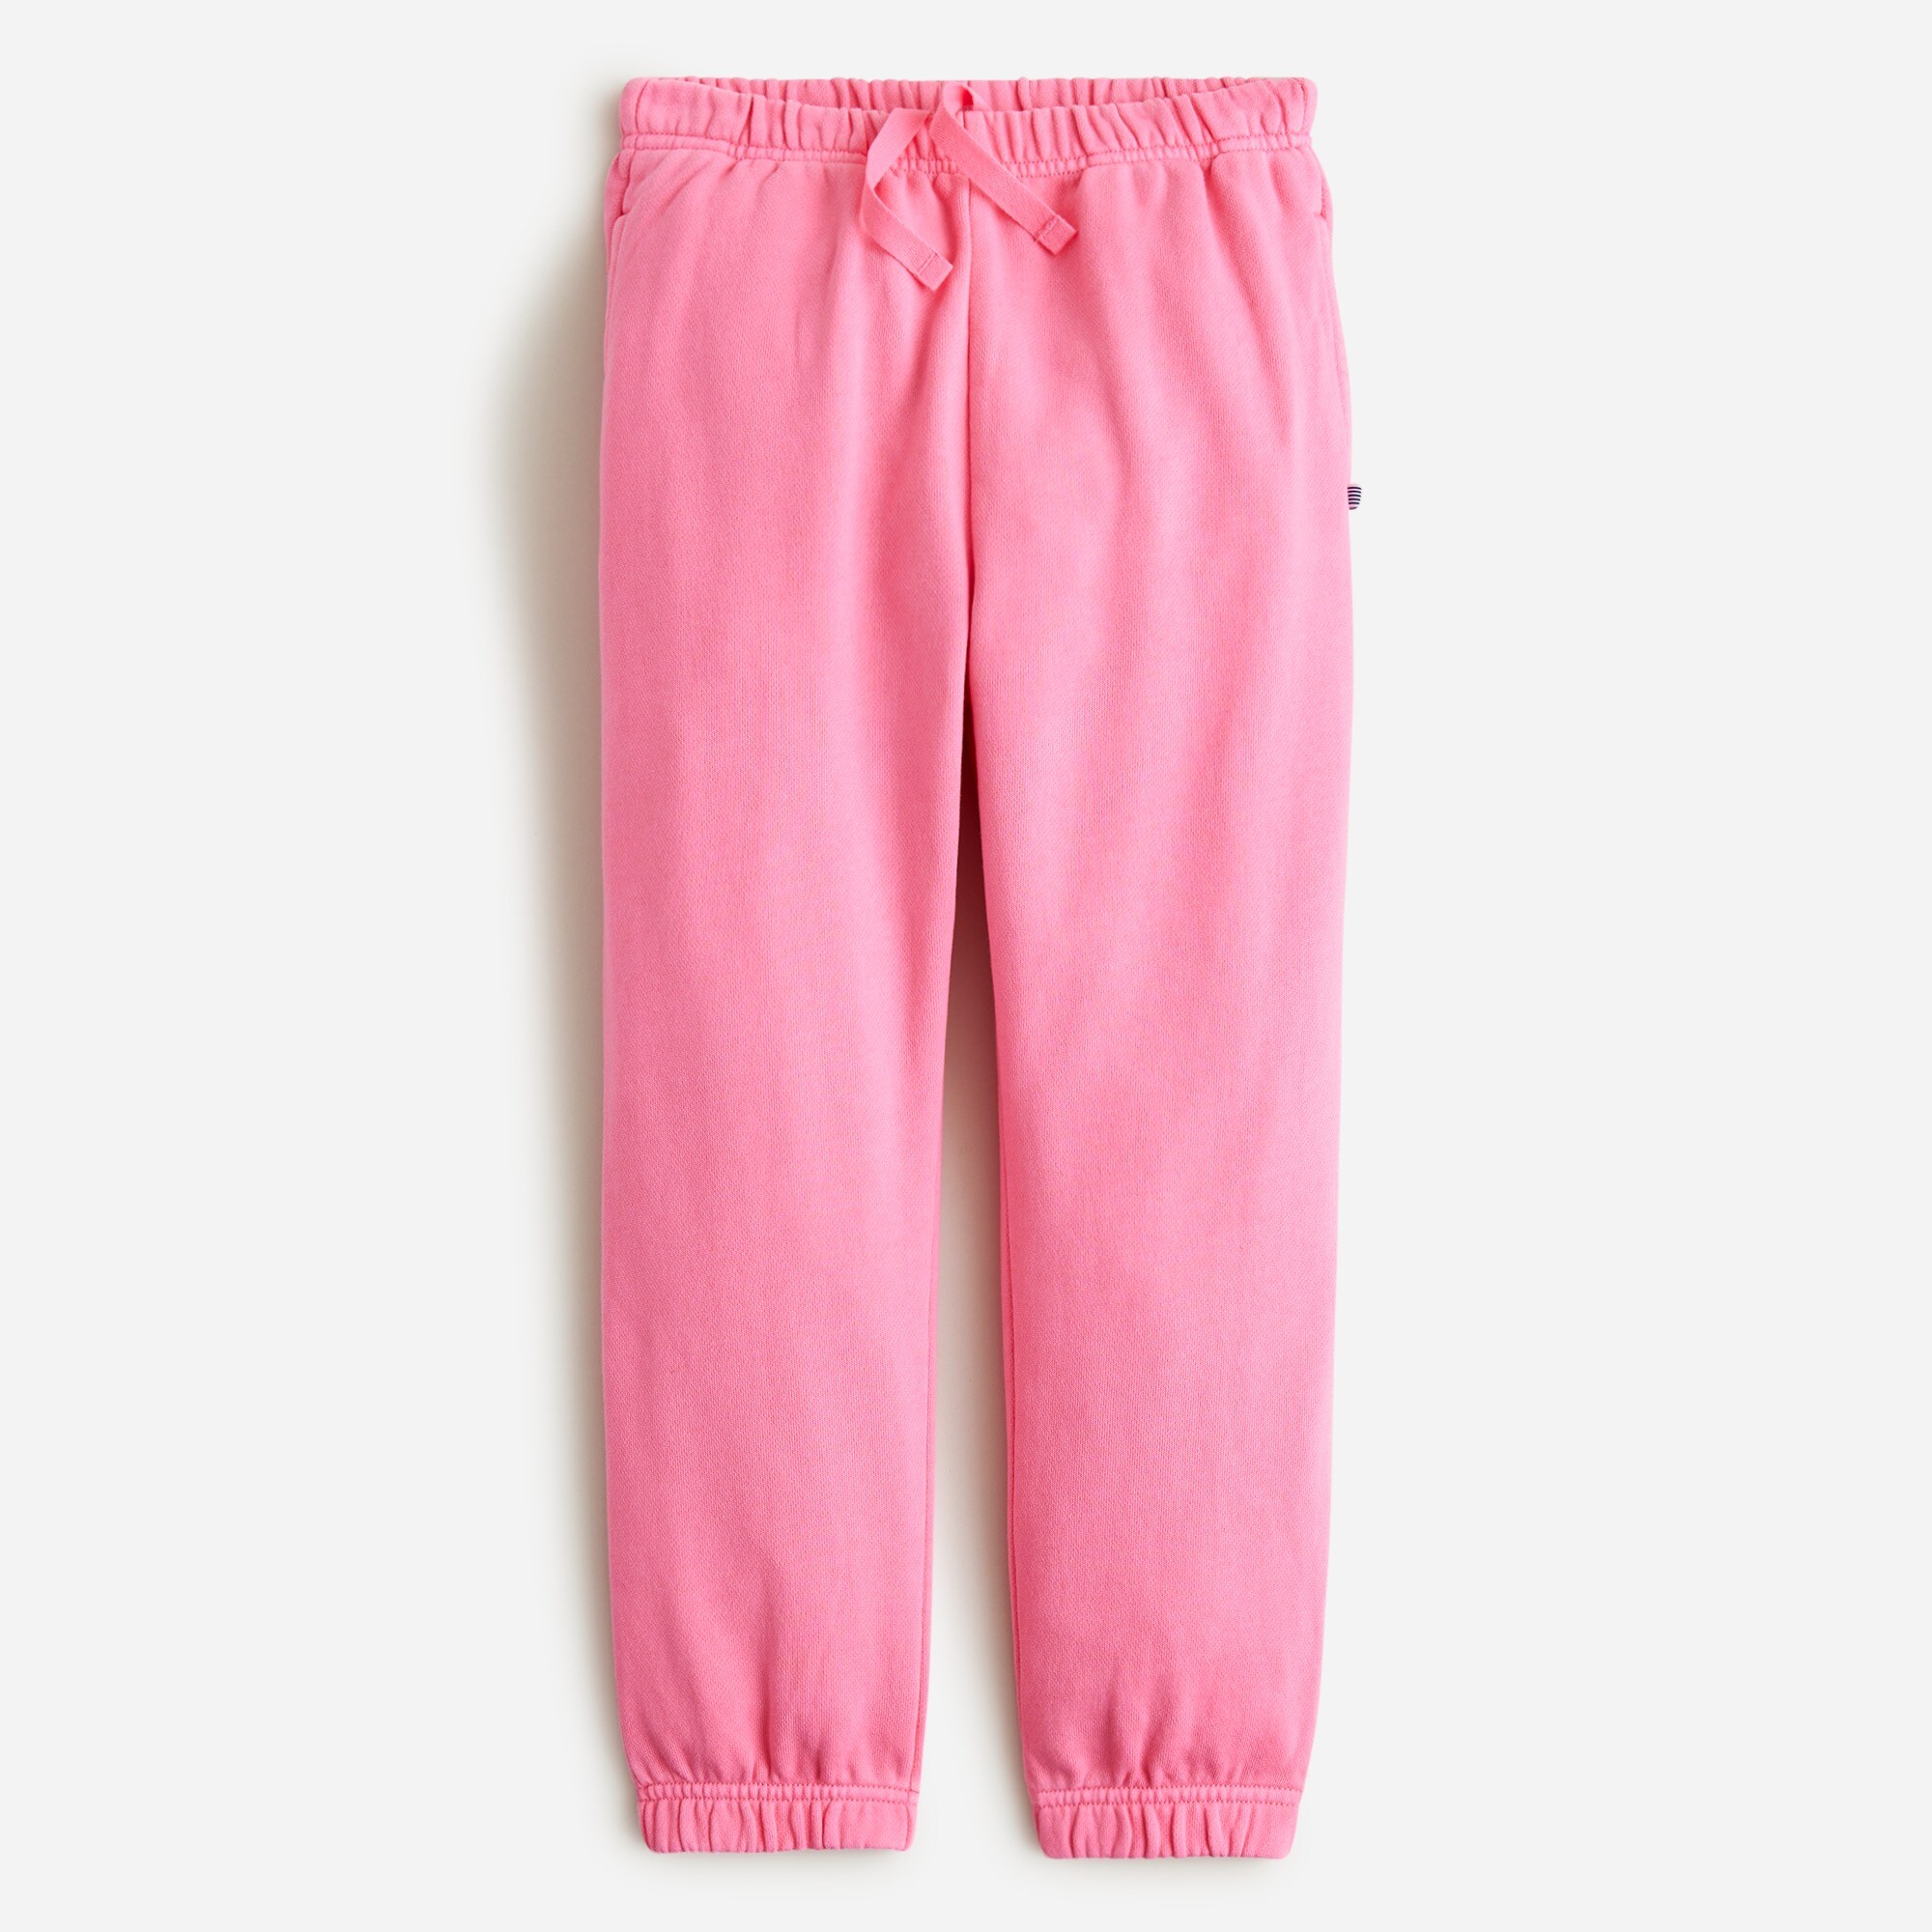 boys KID by Crewcuts garment-dyed sweatpant